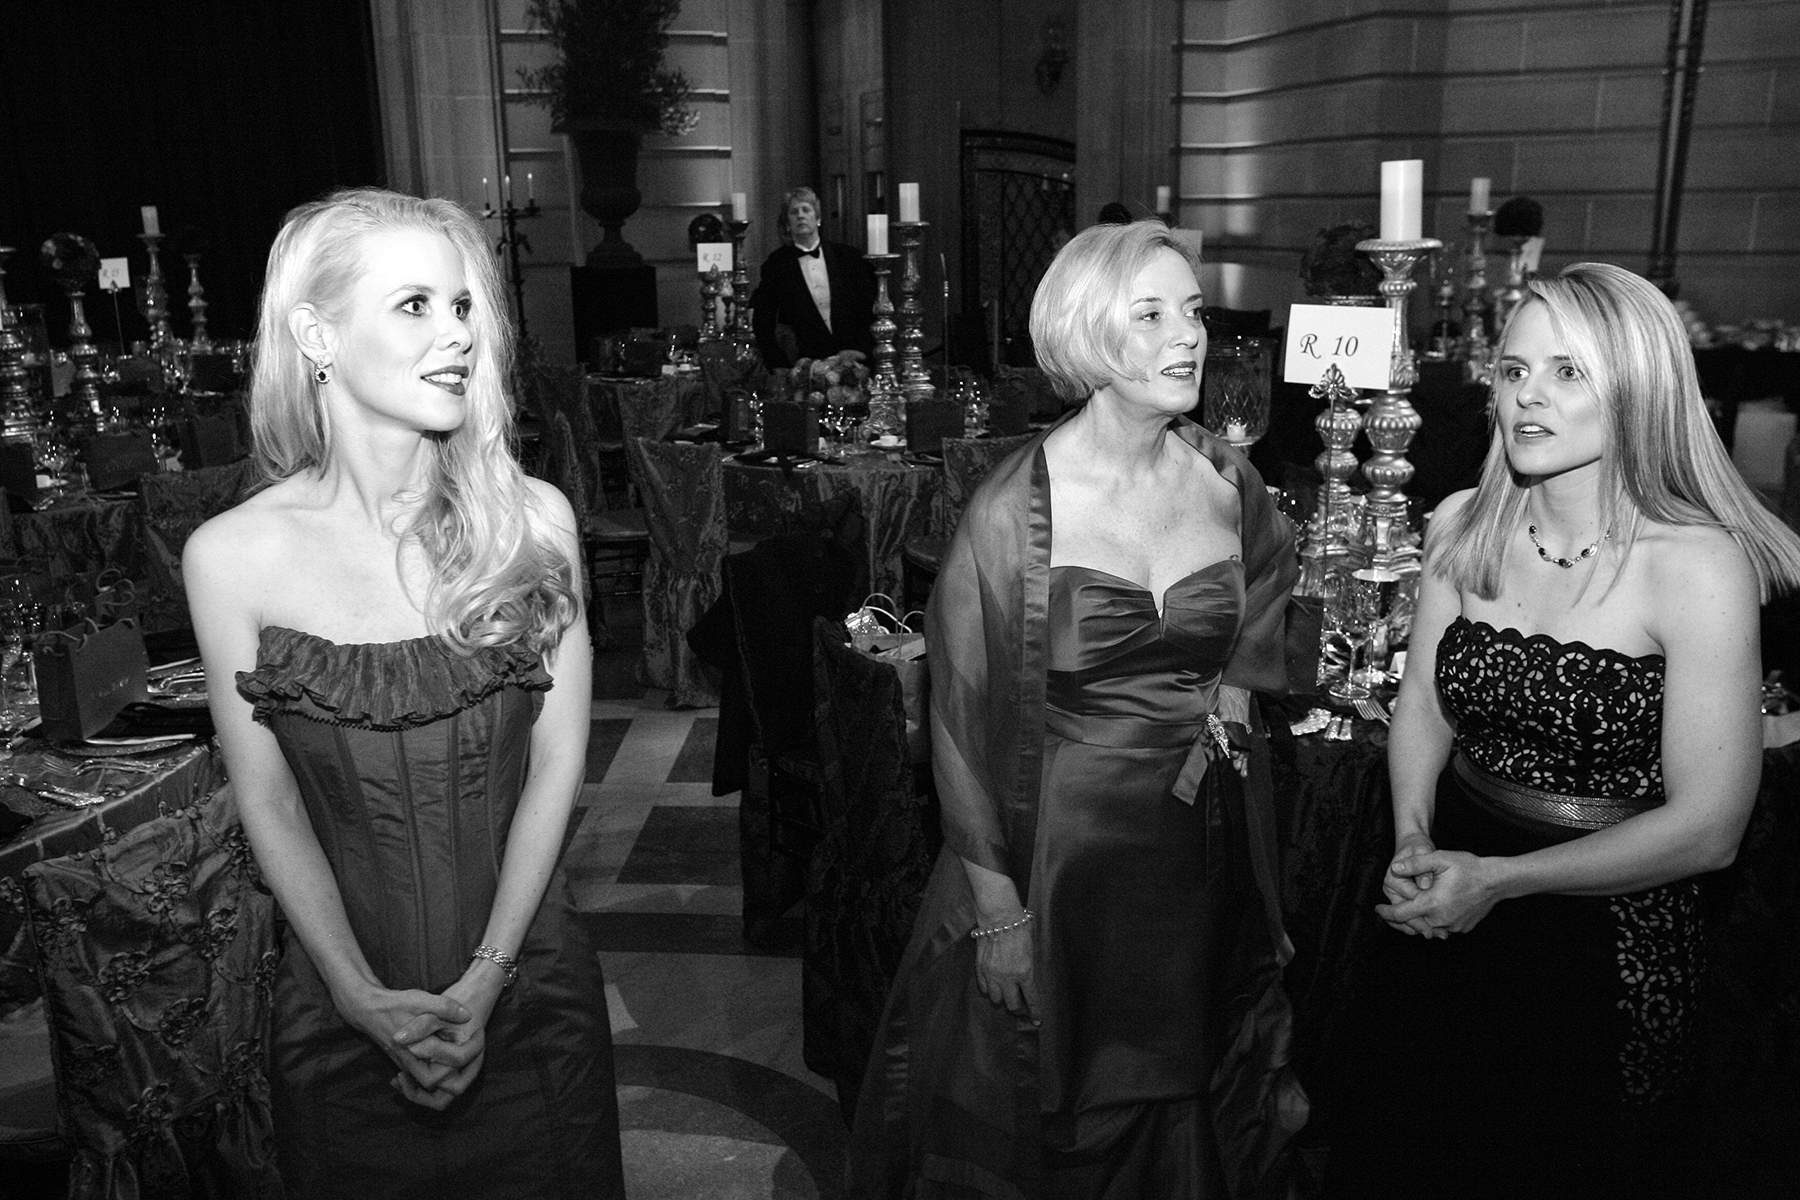 Gala chairwoman Shannon Cronan (left) checks out the decorations with other members of the ballet auxiliary before the start of the San Francisco Ballet Opening Night Gala at City Hall in San Francisco, Calif., on Wednesday, January 24, 2007. This photograph is of a candid moment and was not directed in any way.